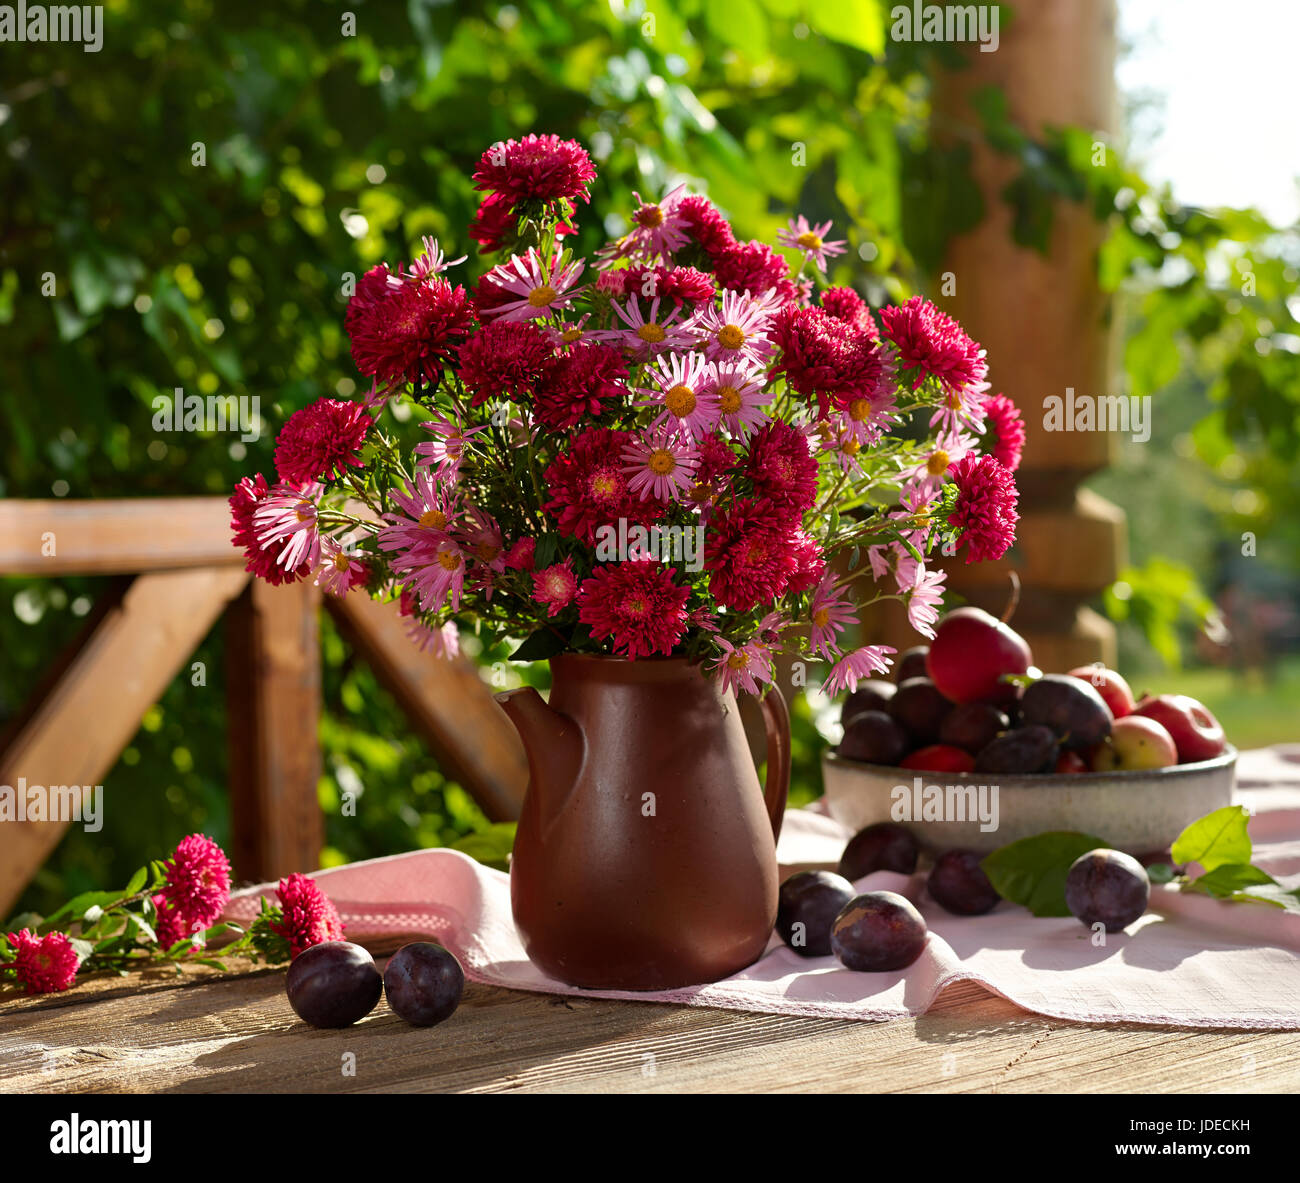 Bouquet of flowers with asters. Stock Photo